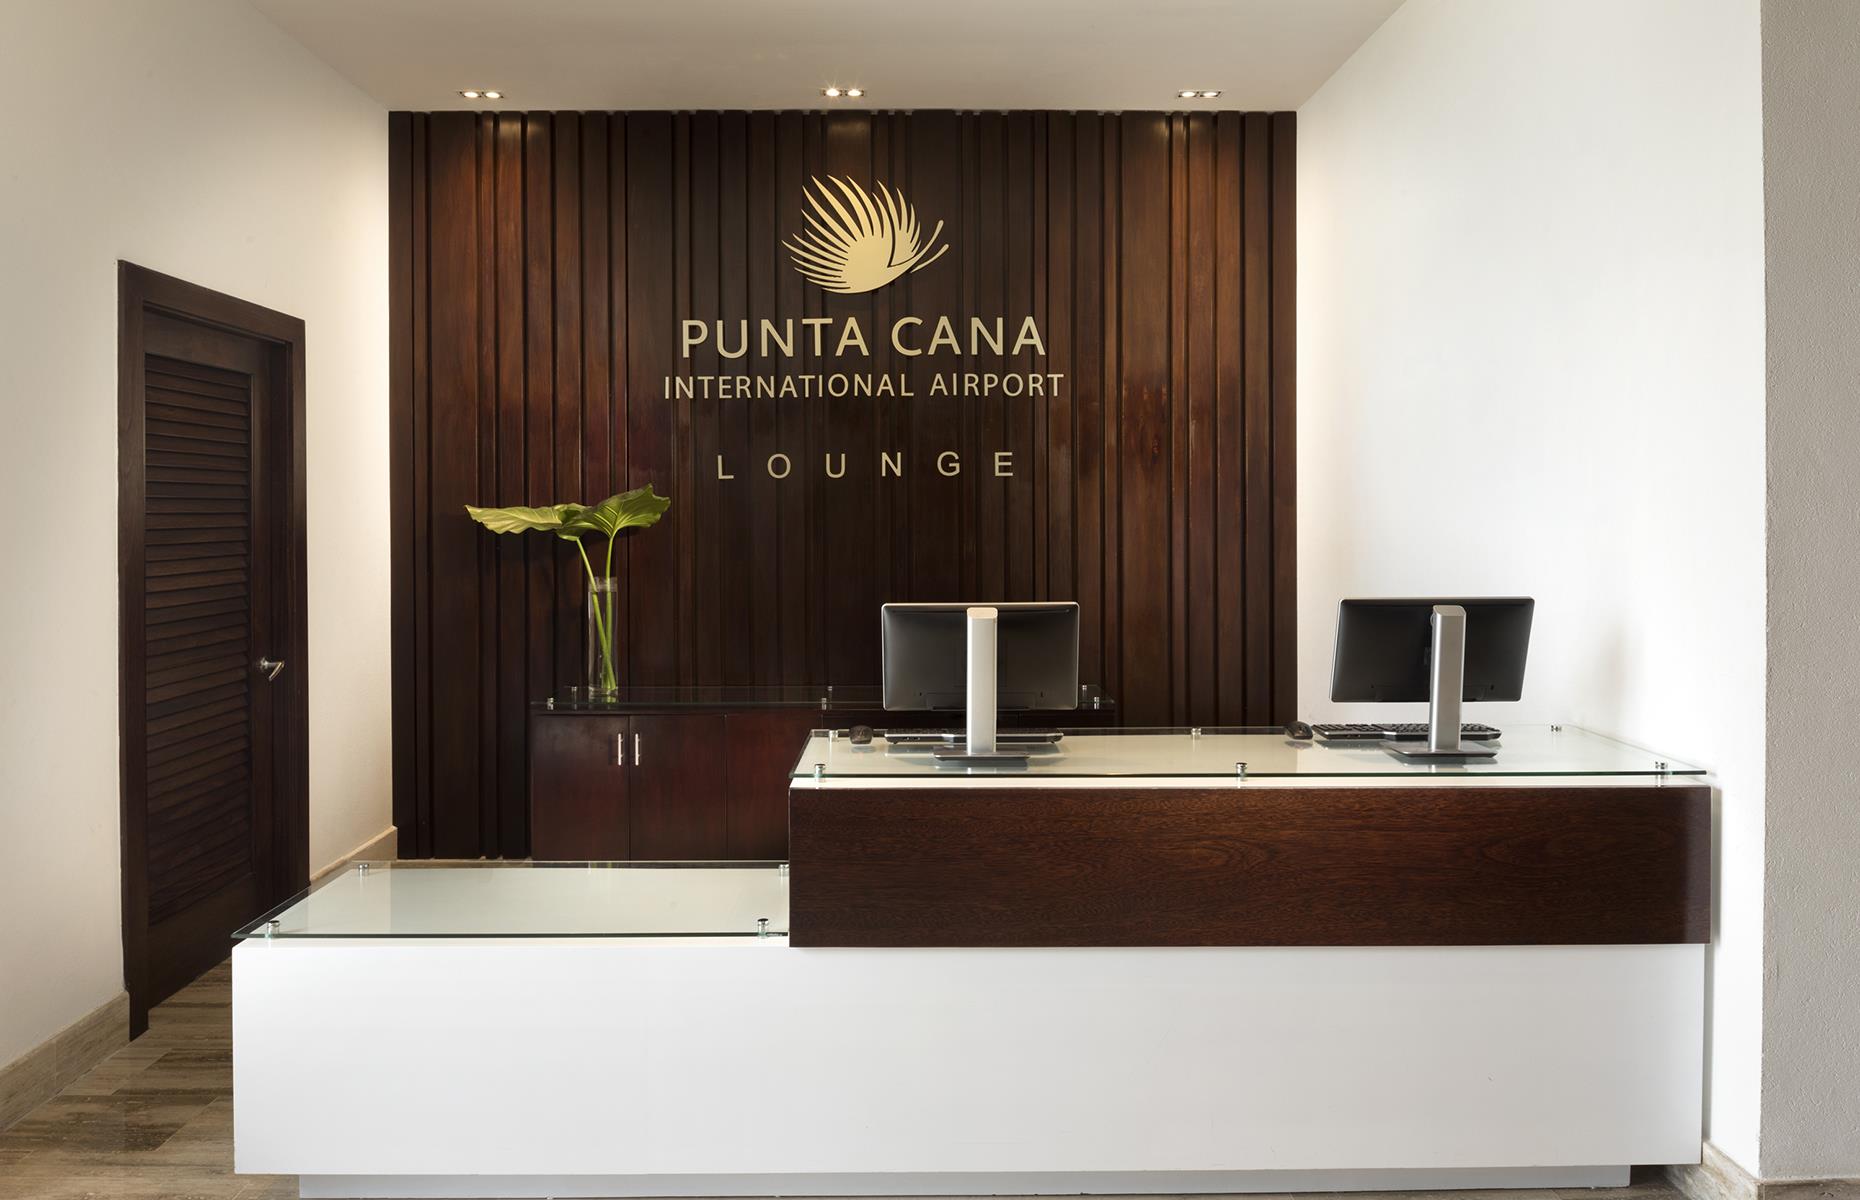 <p>Why end a luxury break in the Caribbean at a busy, stuffy departures lounge when you could check-in to the <a href="https://www.prioritypass.com/en/lounges/dominican-republic/punta-cana-international/puj1-vip-lounge-punta-cana">VIP Lounge at Punta Cana International Airport</a>? This pay-to-use lounge takes the edge off the disappointment of leaving this idyllic isle, with complimentary food and drink, and ample soft seating.</p>